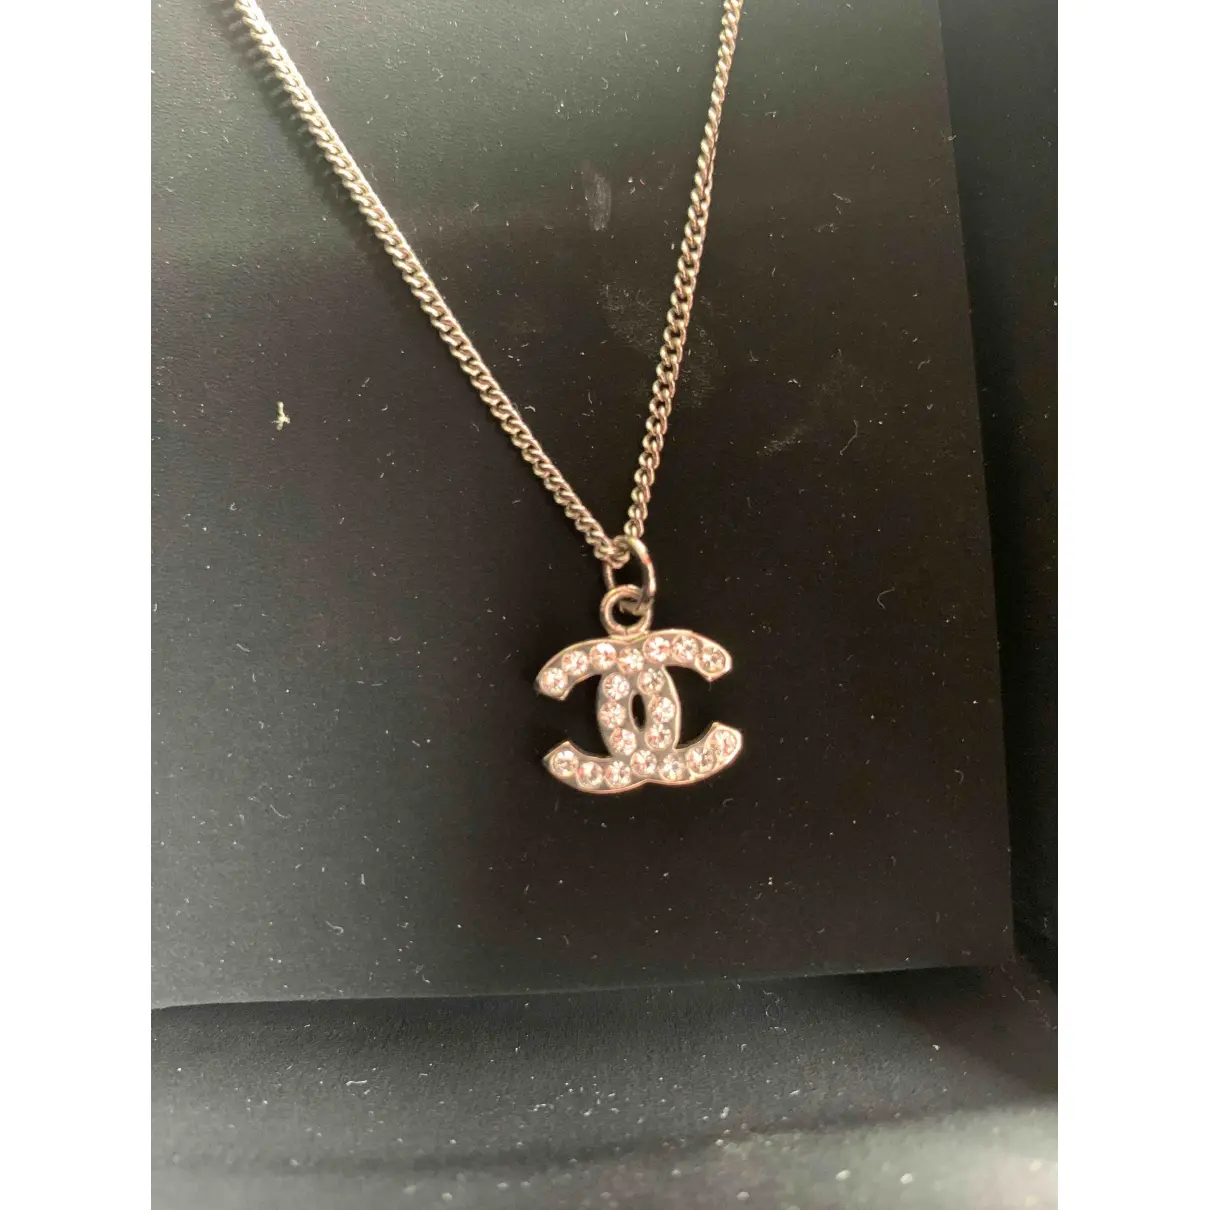 Buy Chanel CC crystal necklace online